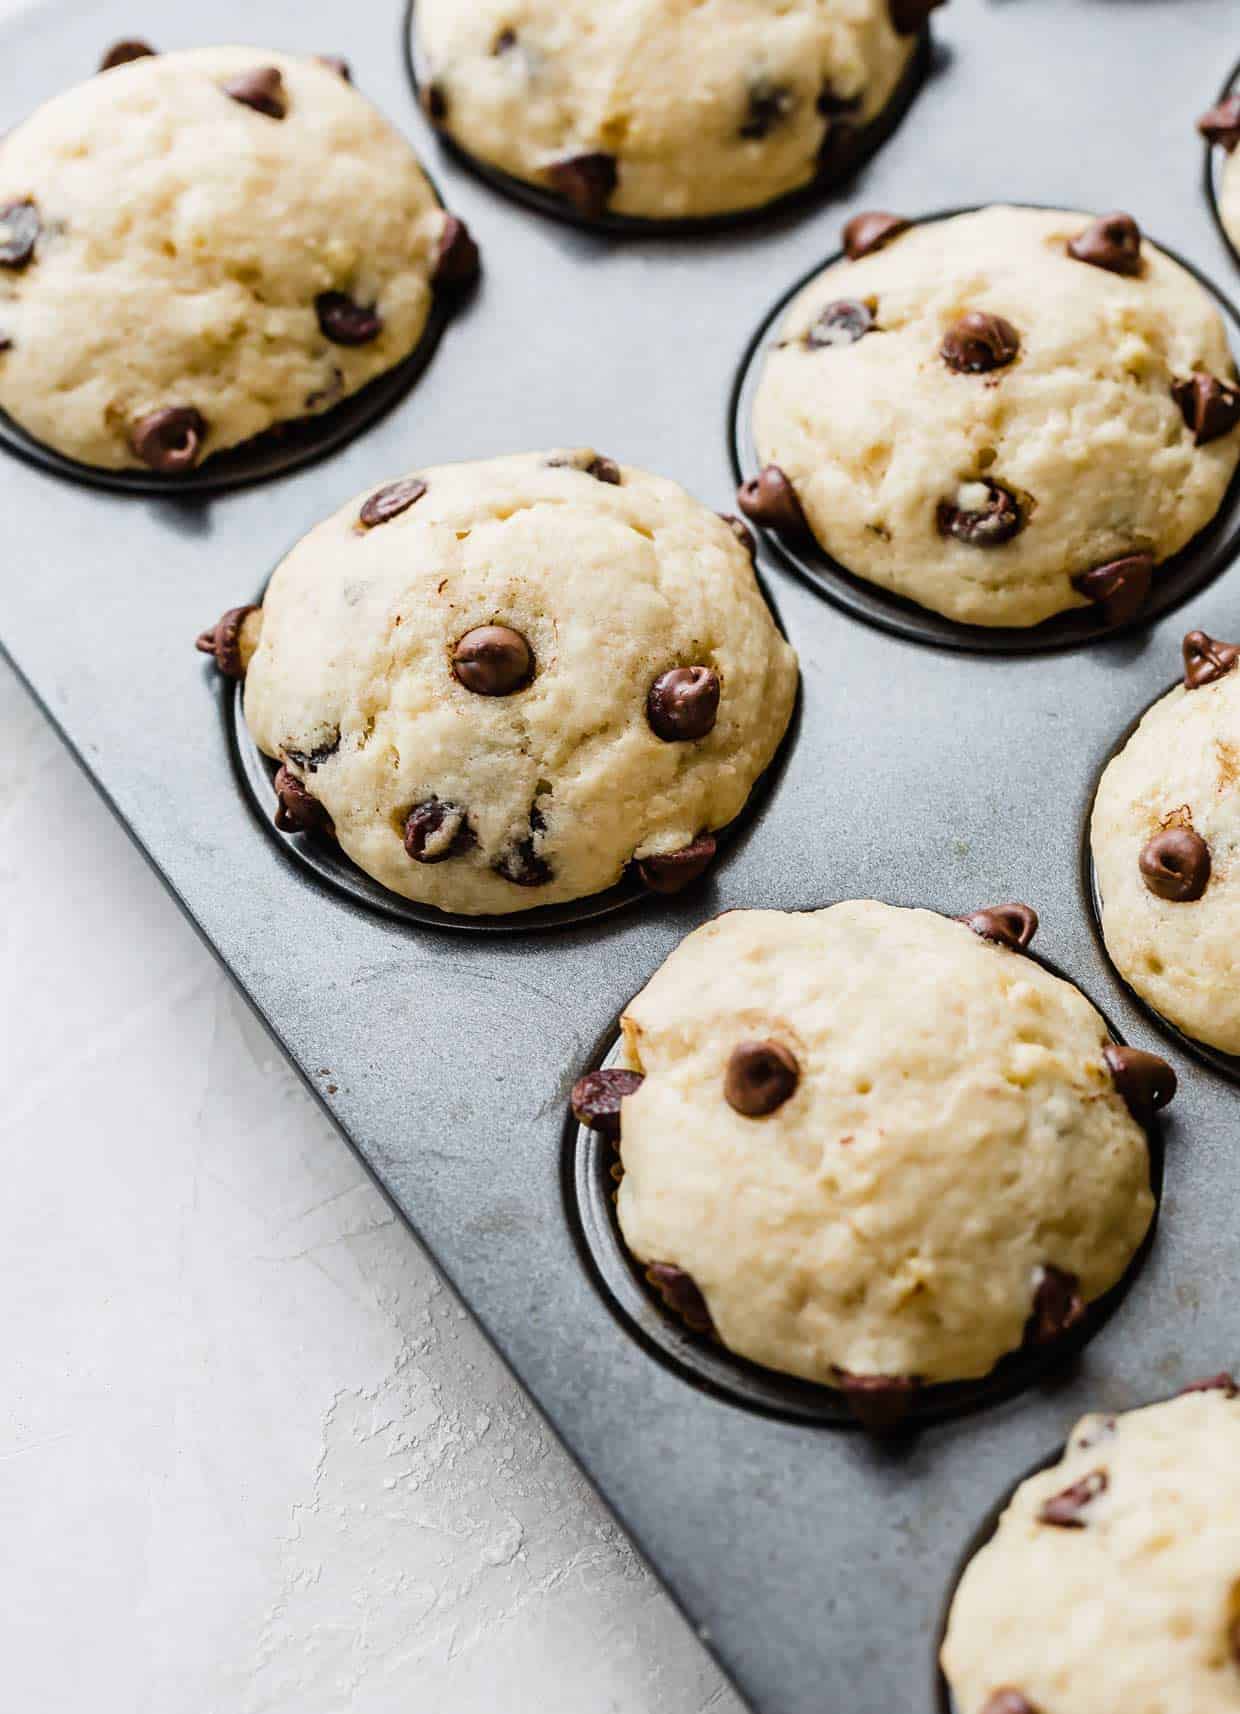 Baked banana chocolate chip muffins with buttermilk, in a muffin tin.